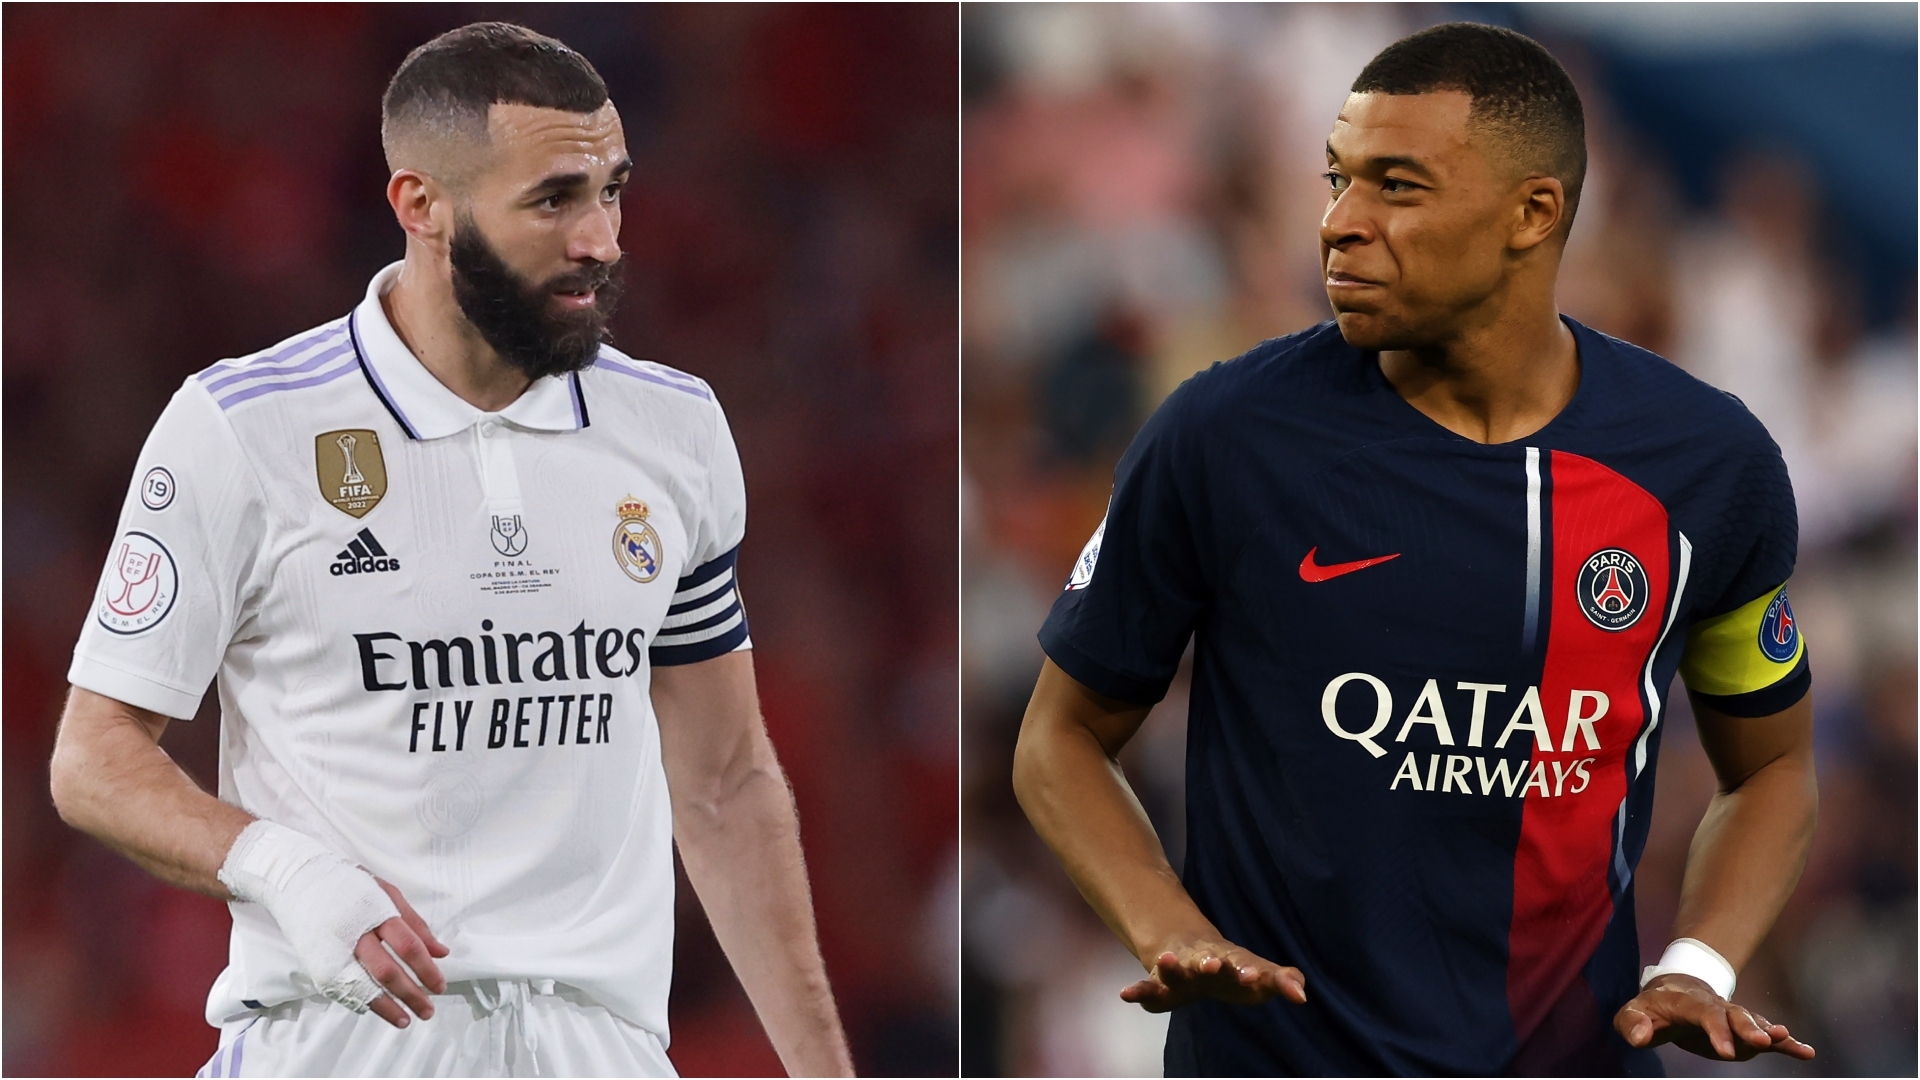 Could Mbappe be Benzemas heir if he goes to Real Madrid? - Stream the Video